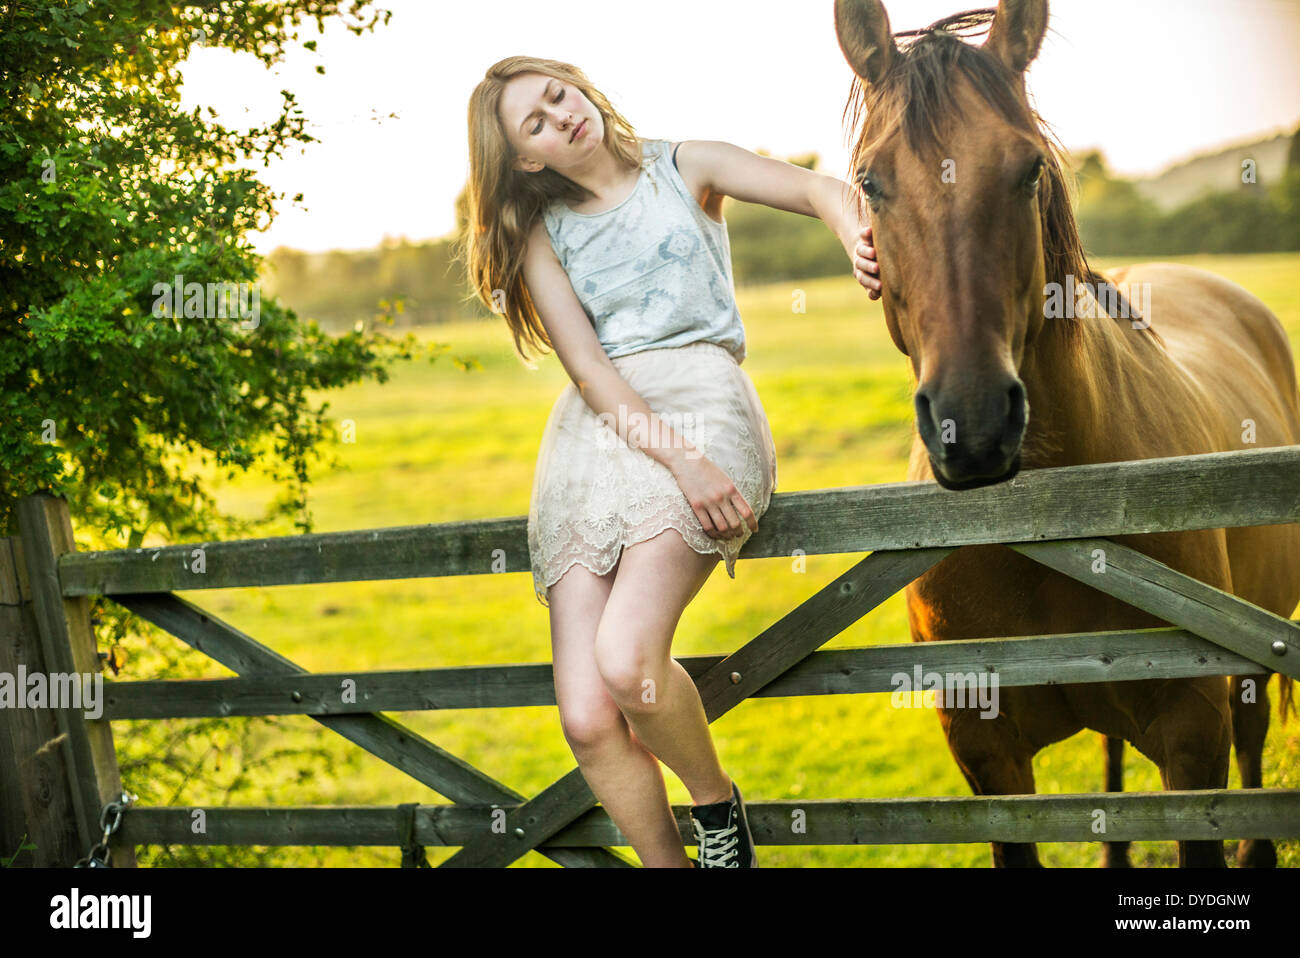 A 15 year old girl with a horse. Stock Photo